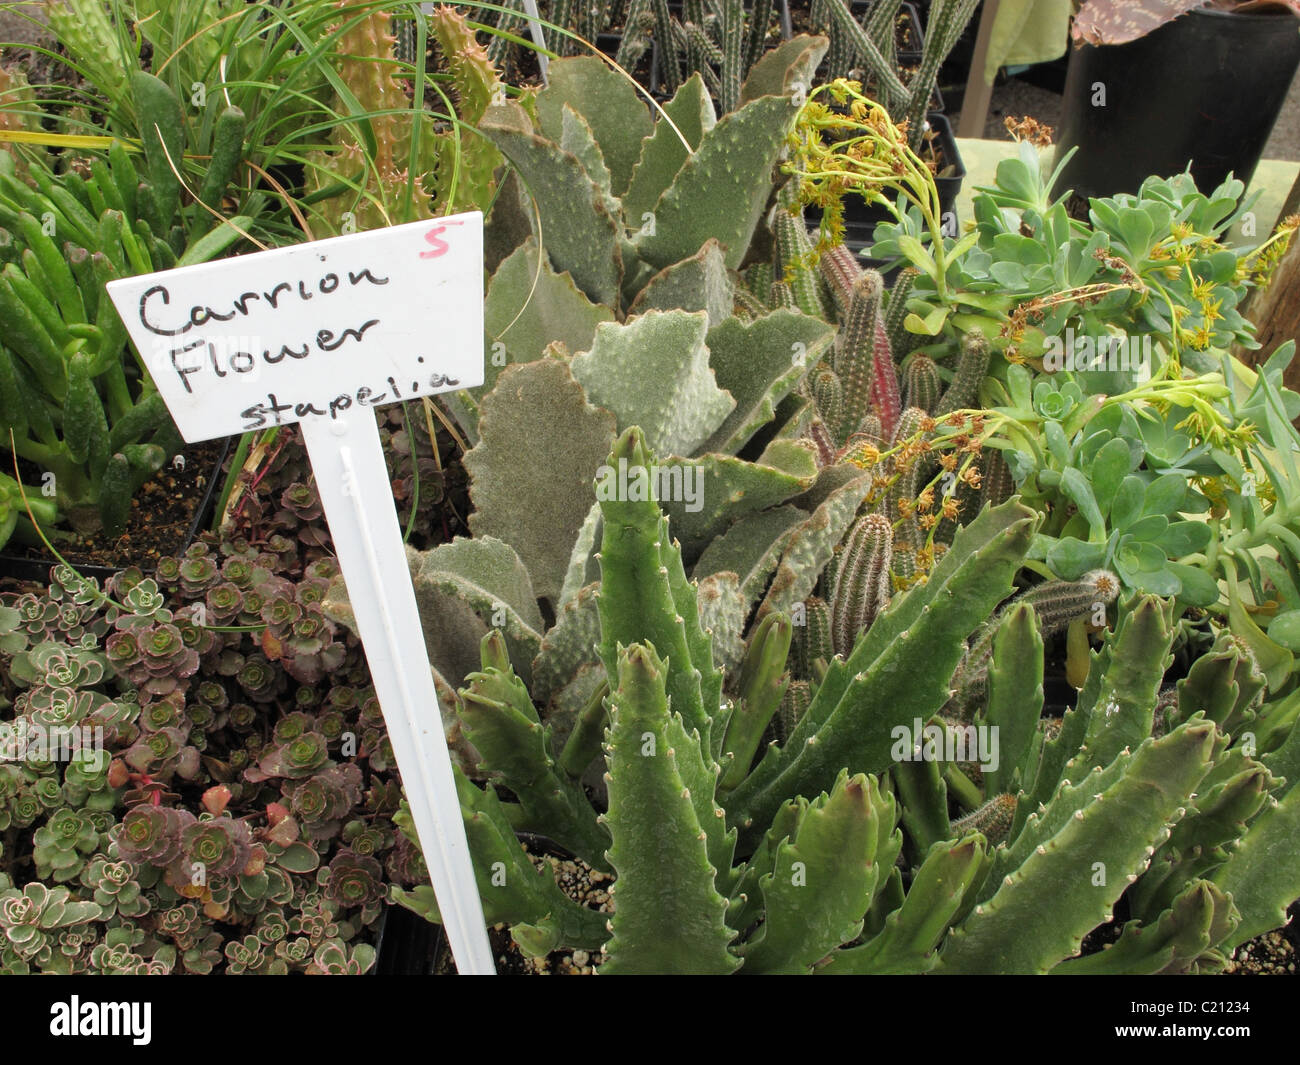 Cactus with sign - Carrion Flower Stapelia - for sale at the farmers' market. Stock Photo